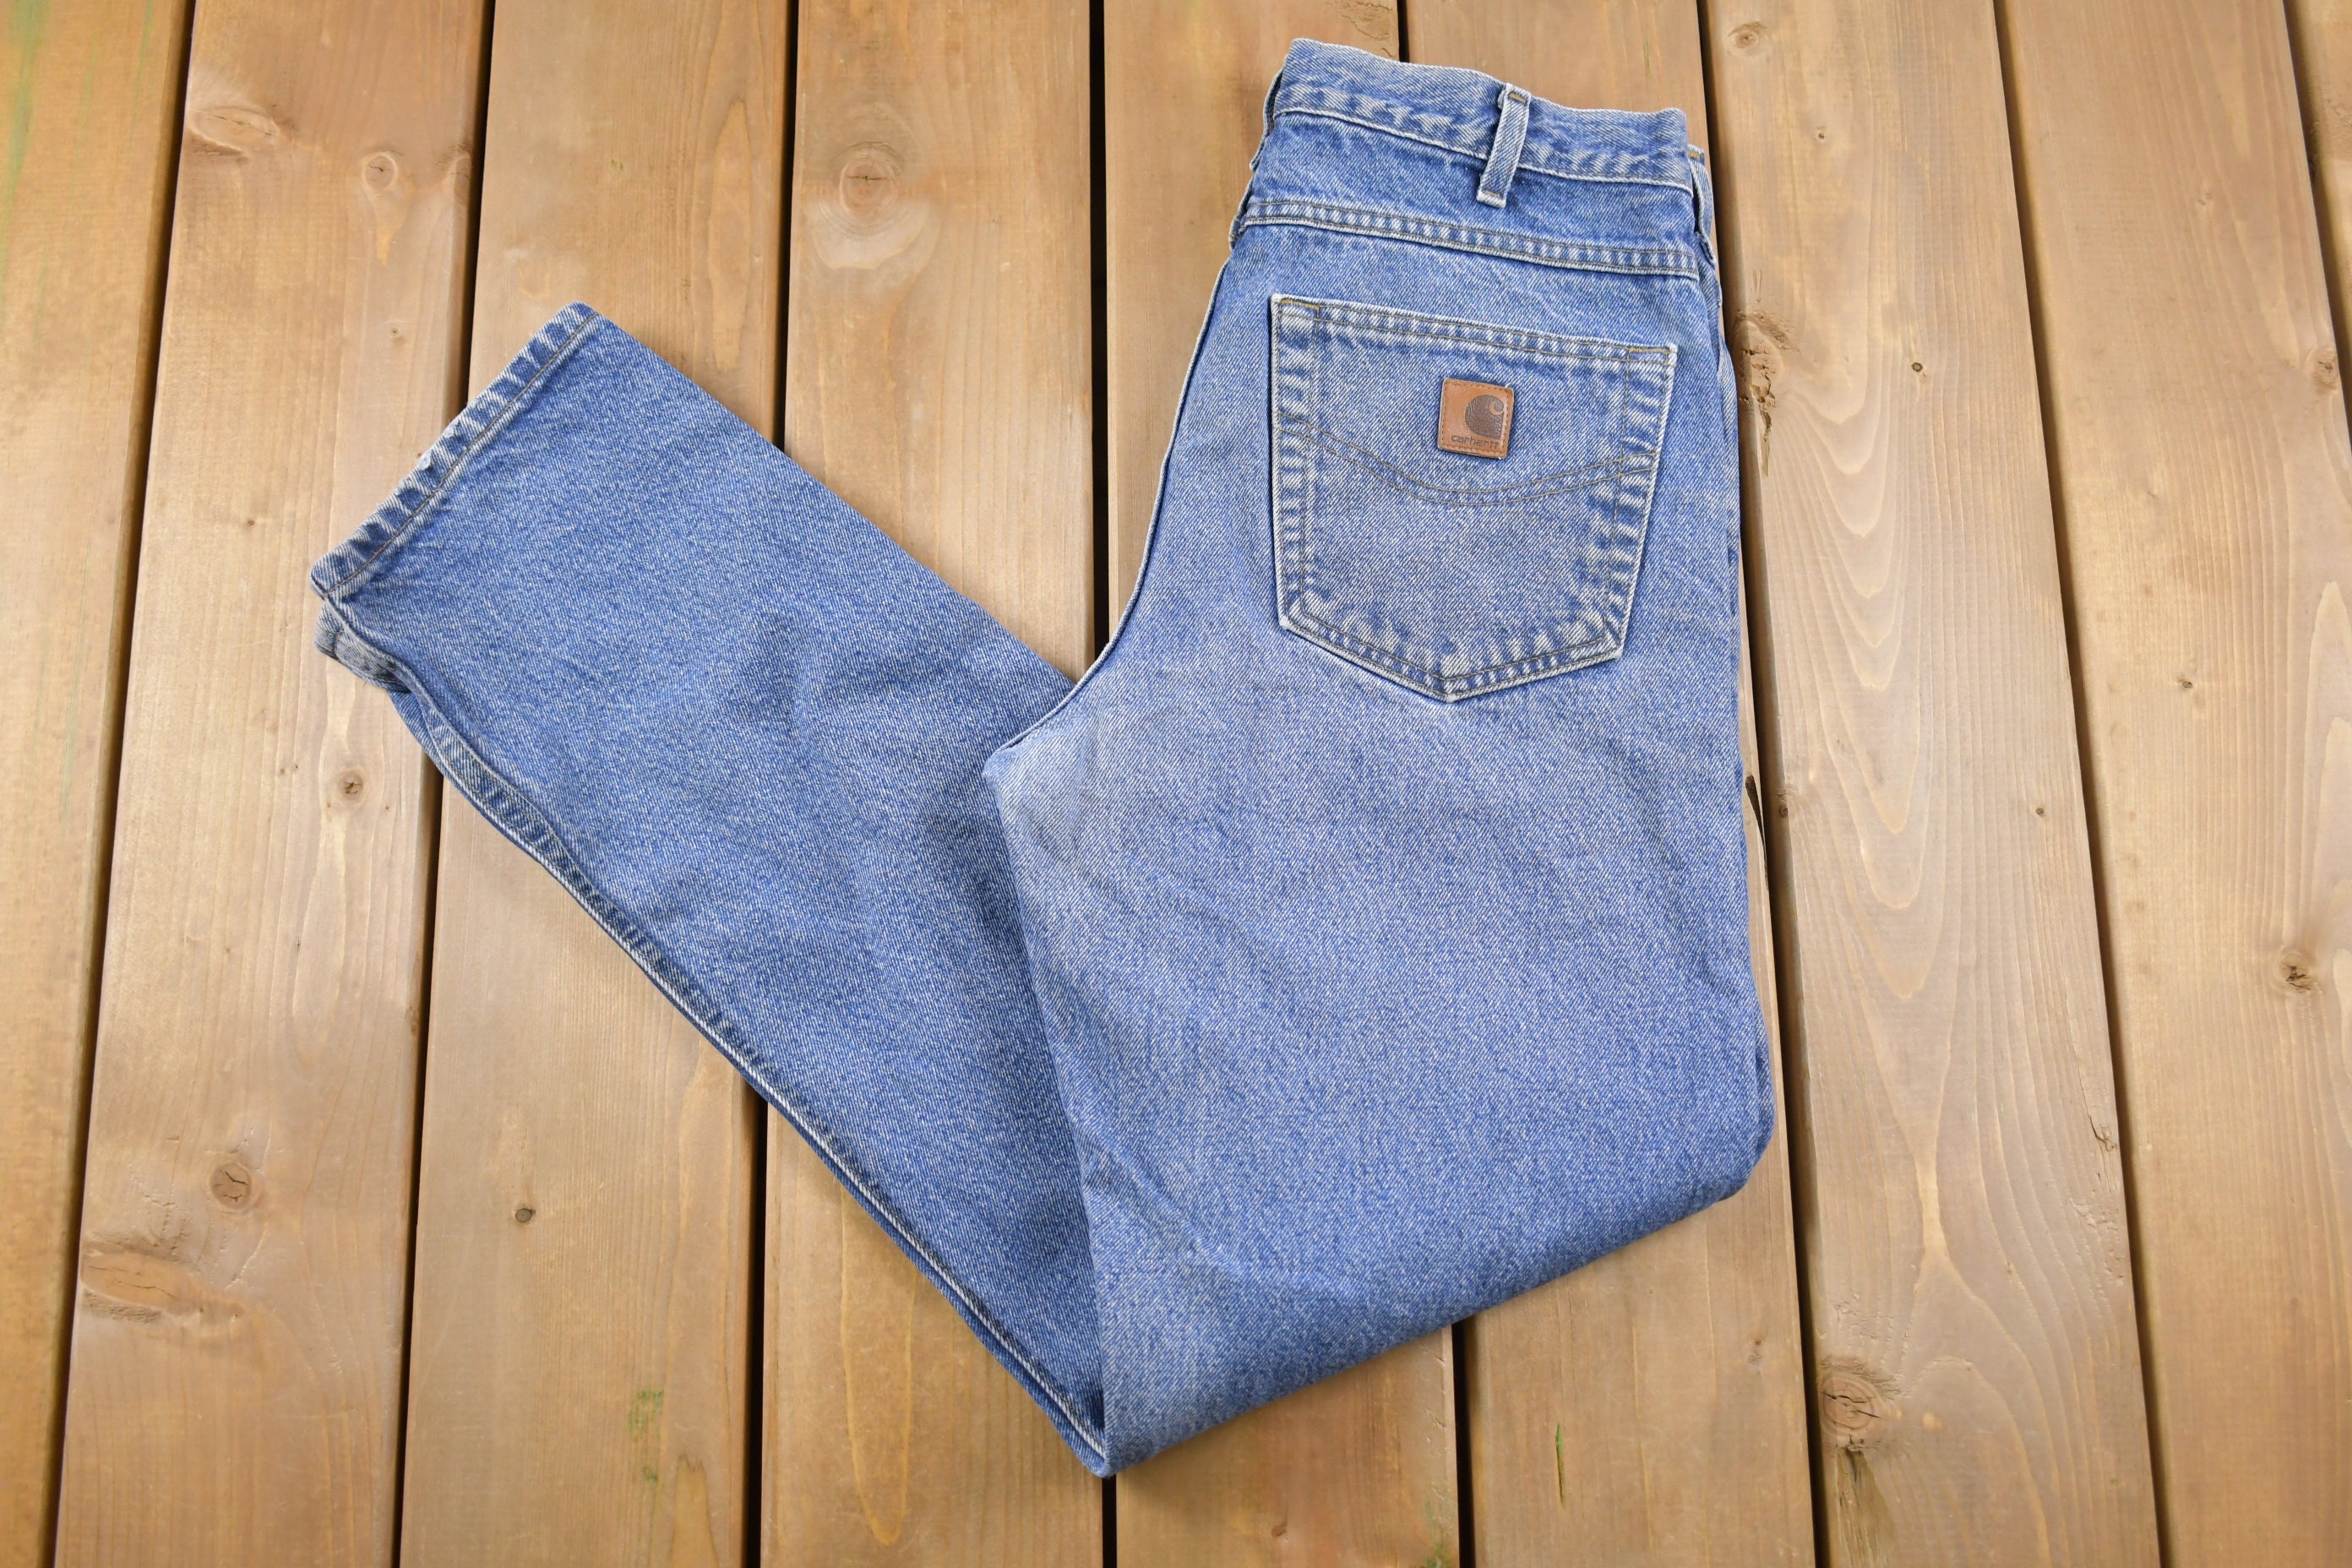 Vintage 1990s Carhartt Work Blue Jeans Size 30 X 32 90s Etsy